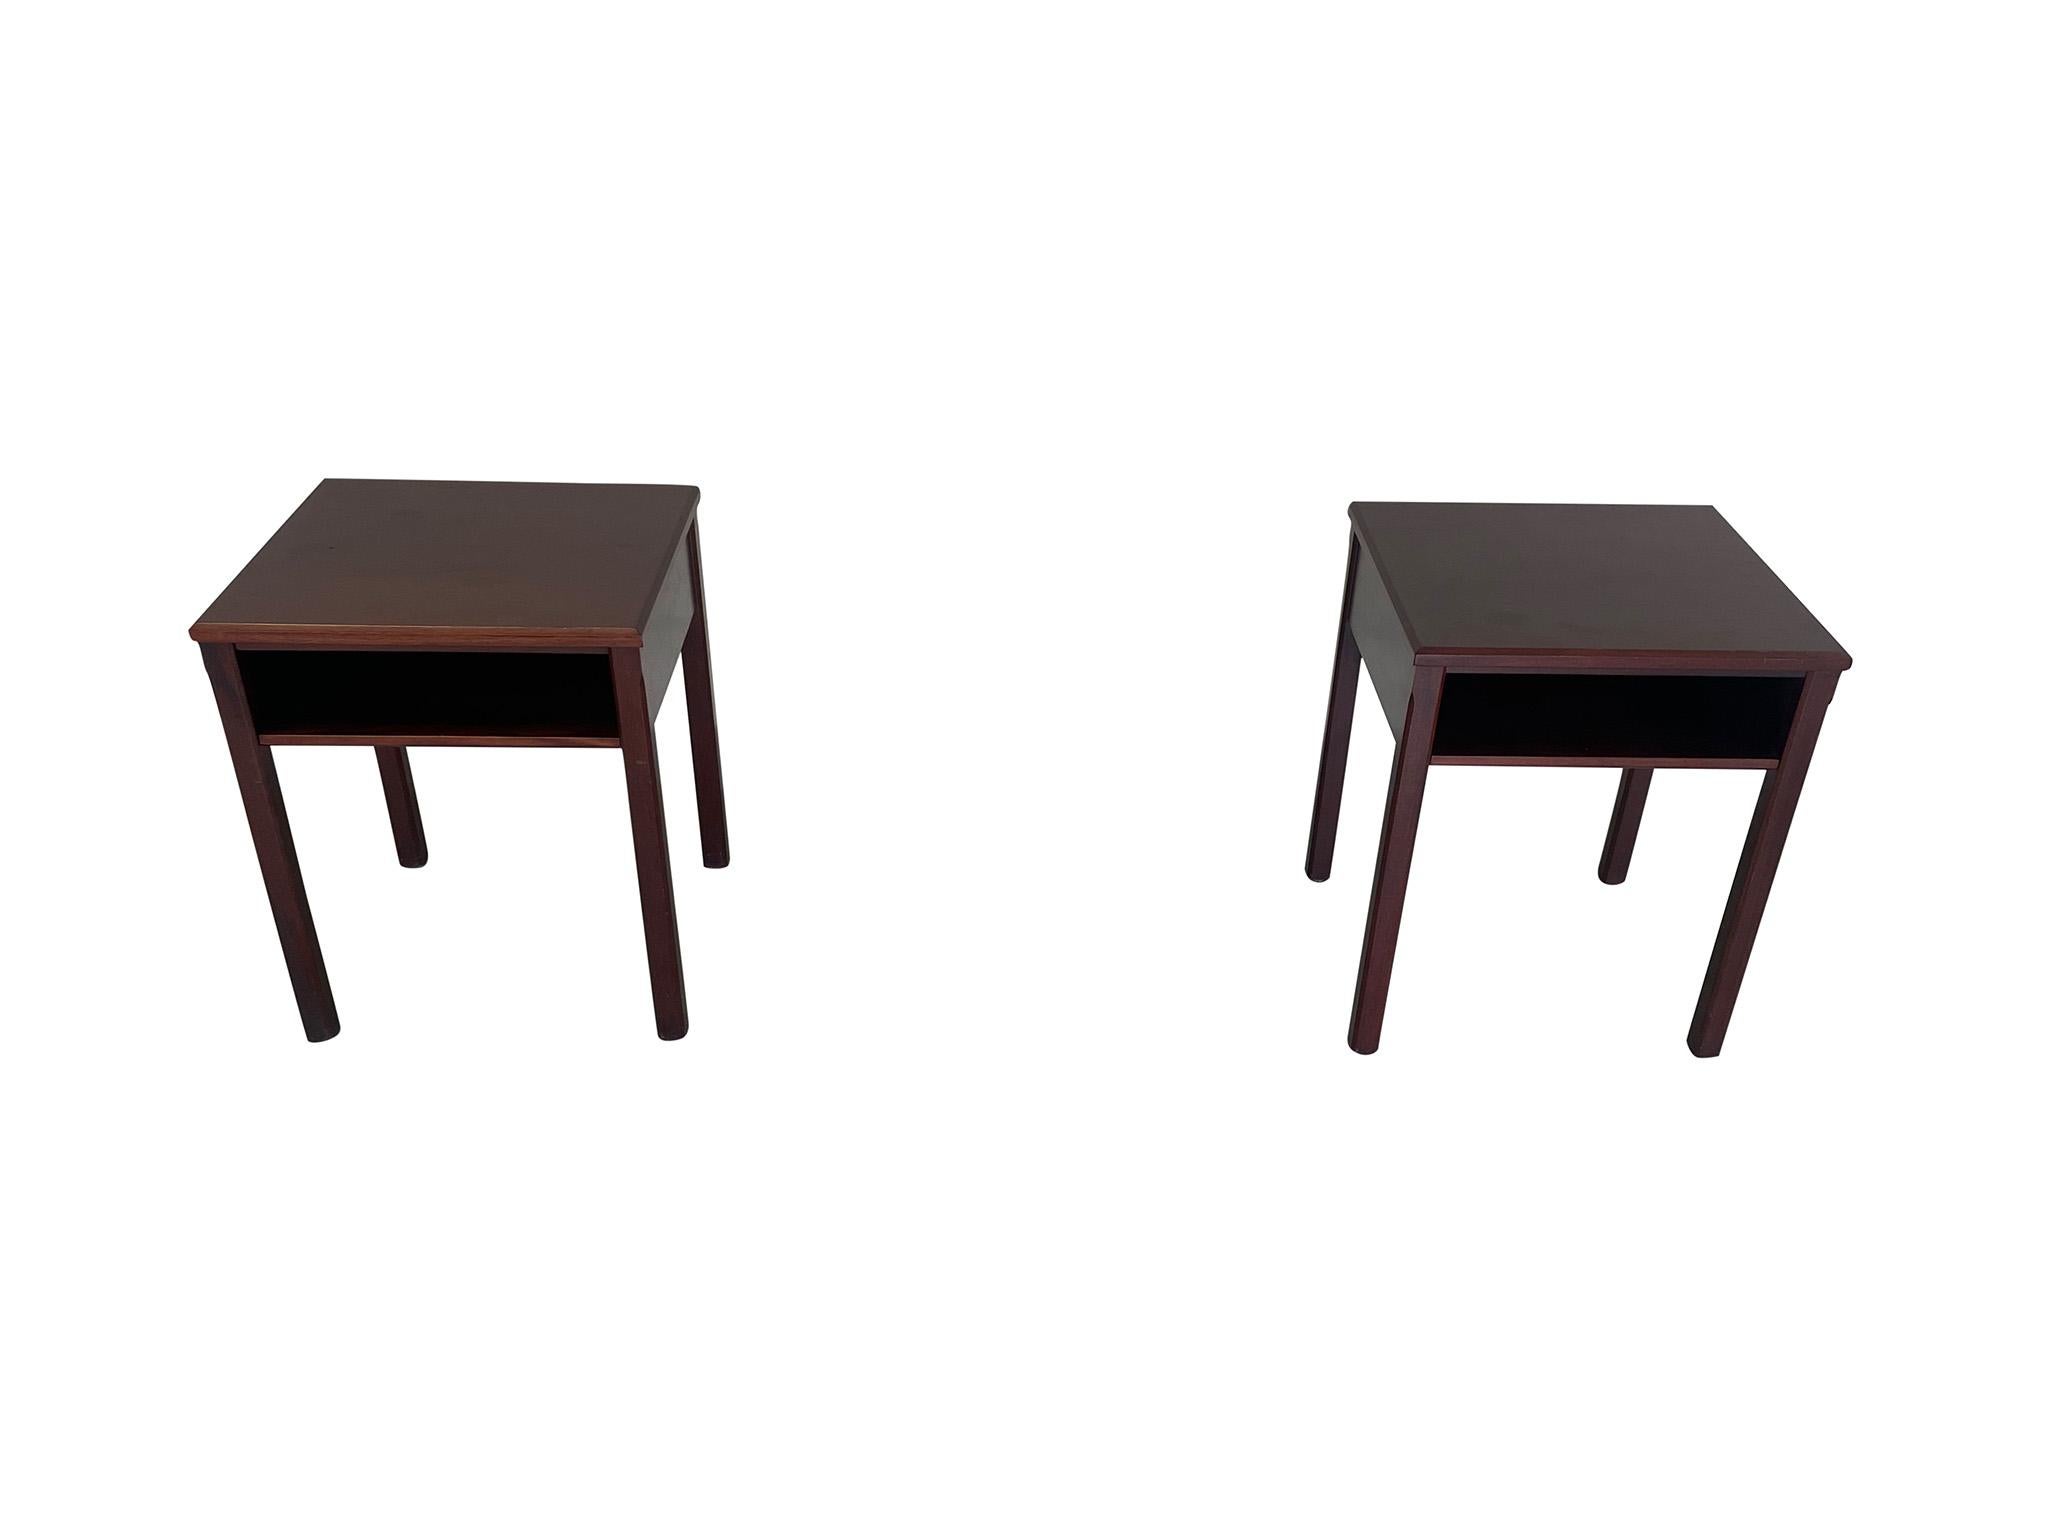 Lovely pair of 1950s Danish Modern nightstands, with makers mark of Lysberg, Hansen, and Therp on underside. Crafted in a high quality mahogany, the tables are designed with Classic clean lines, single open shelves, and simple fluted edge legs. A